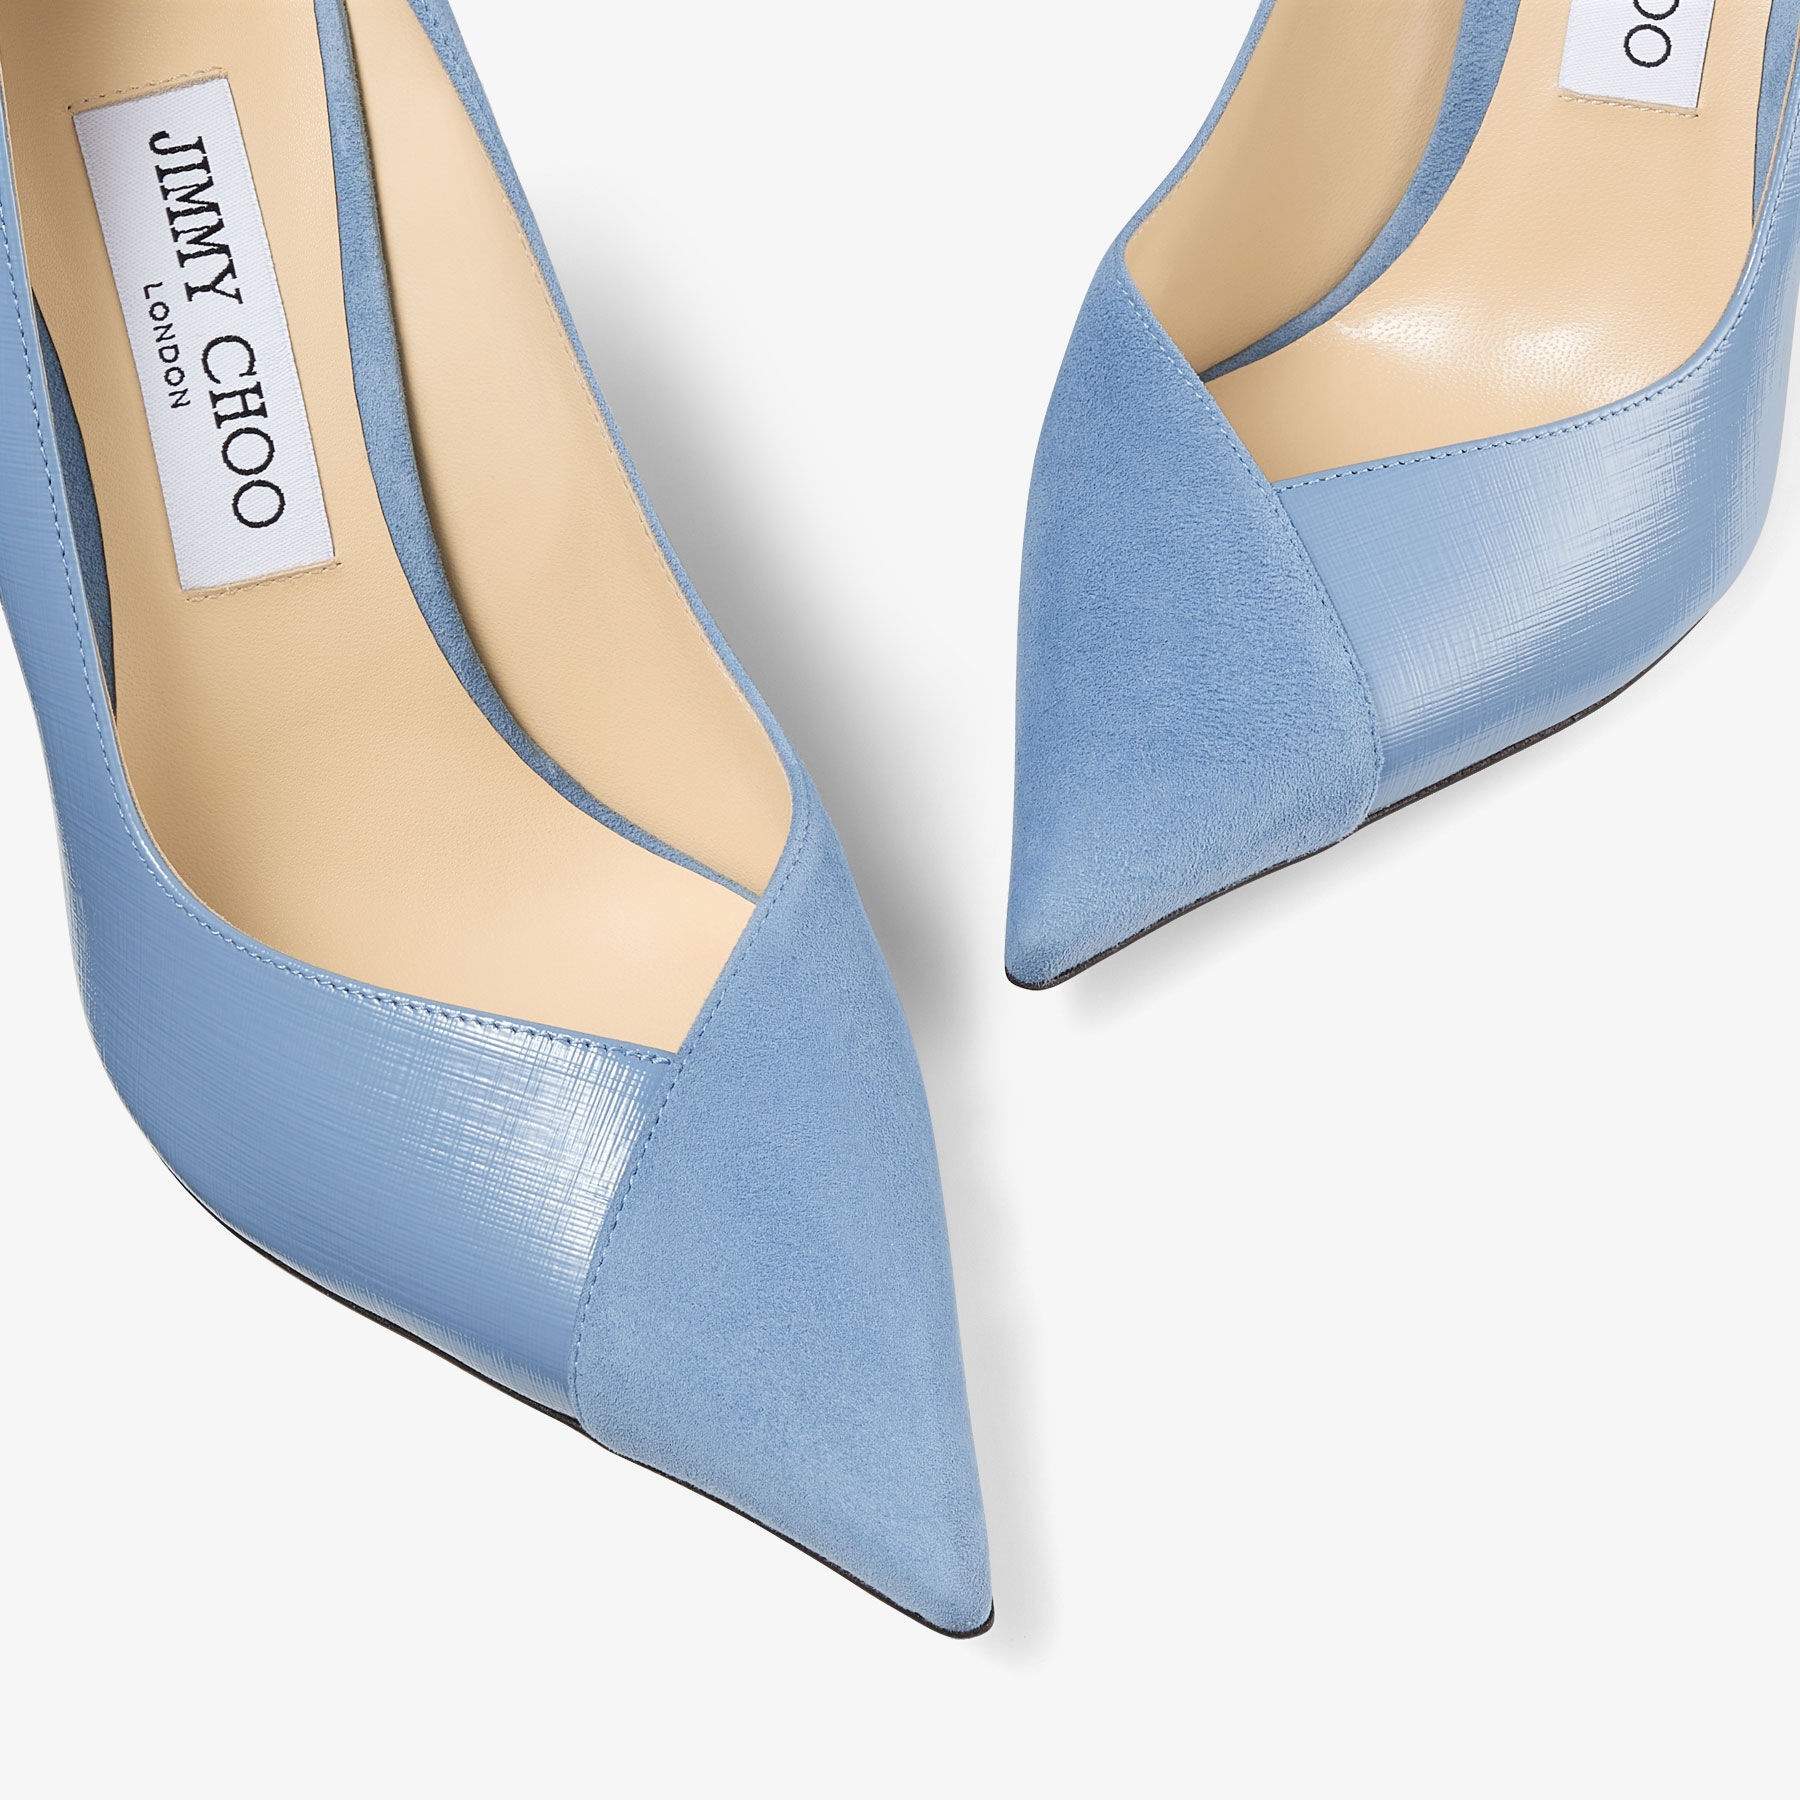 Cass 110
Smoky Blue Suede and Etched Patent Leather Pumps - 4